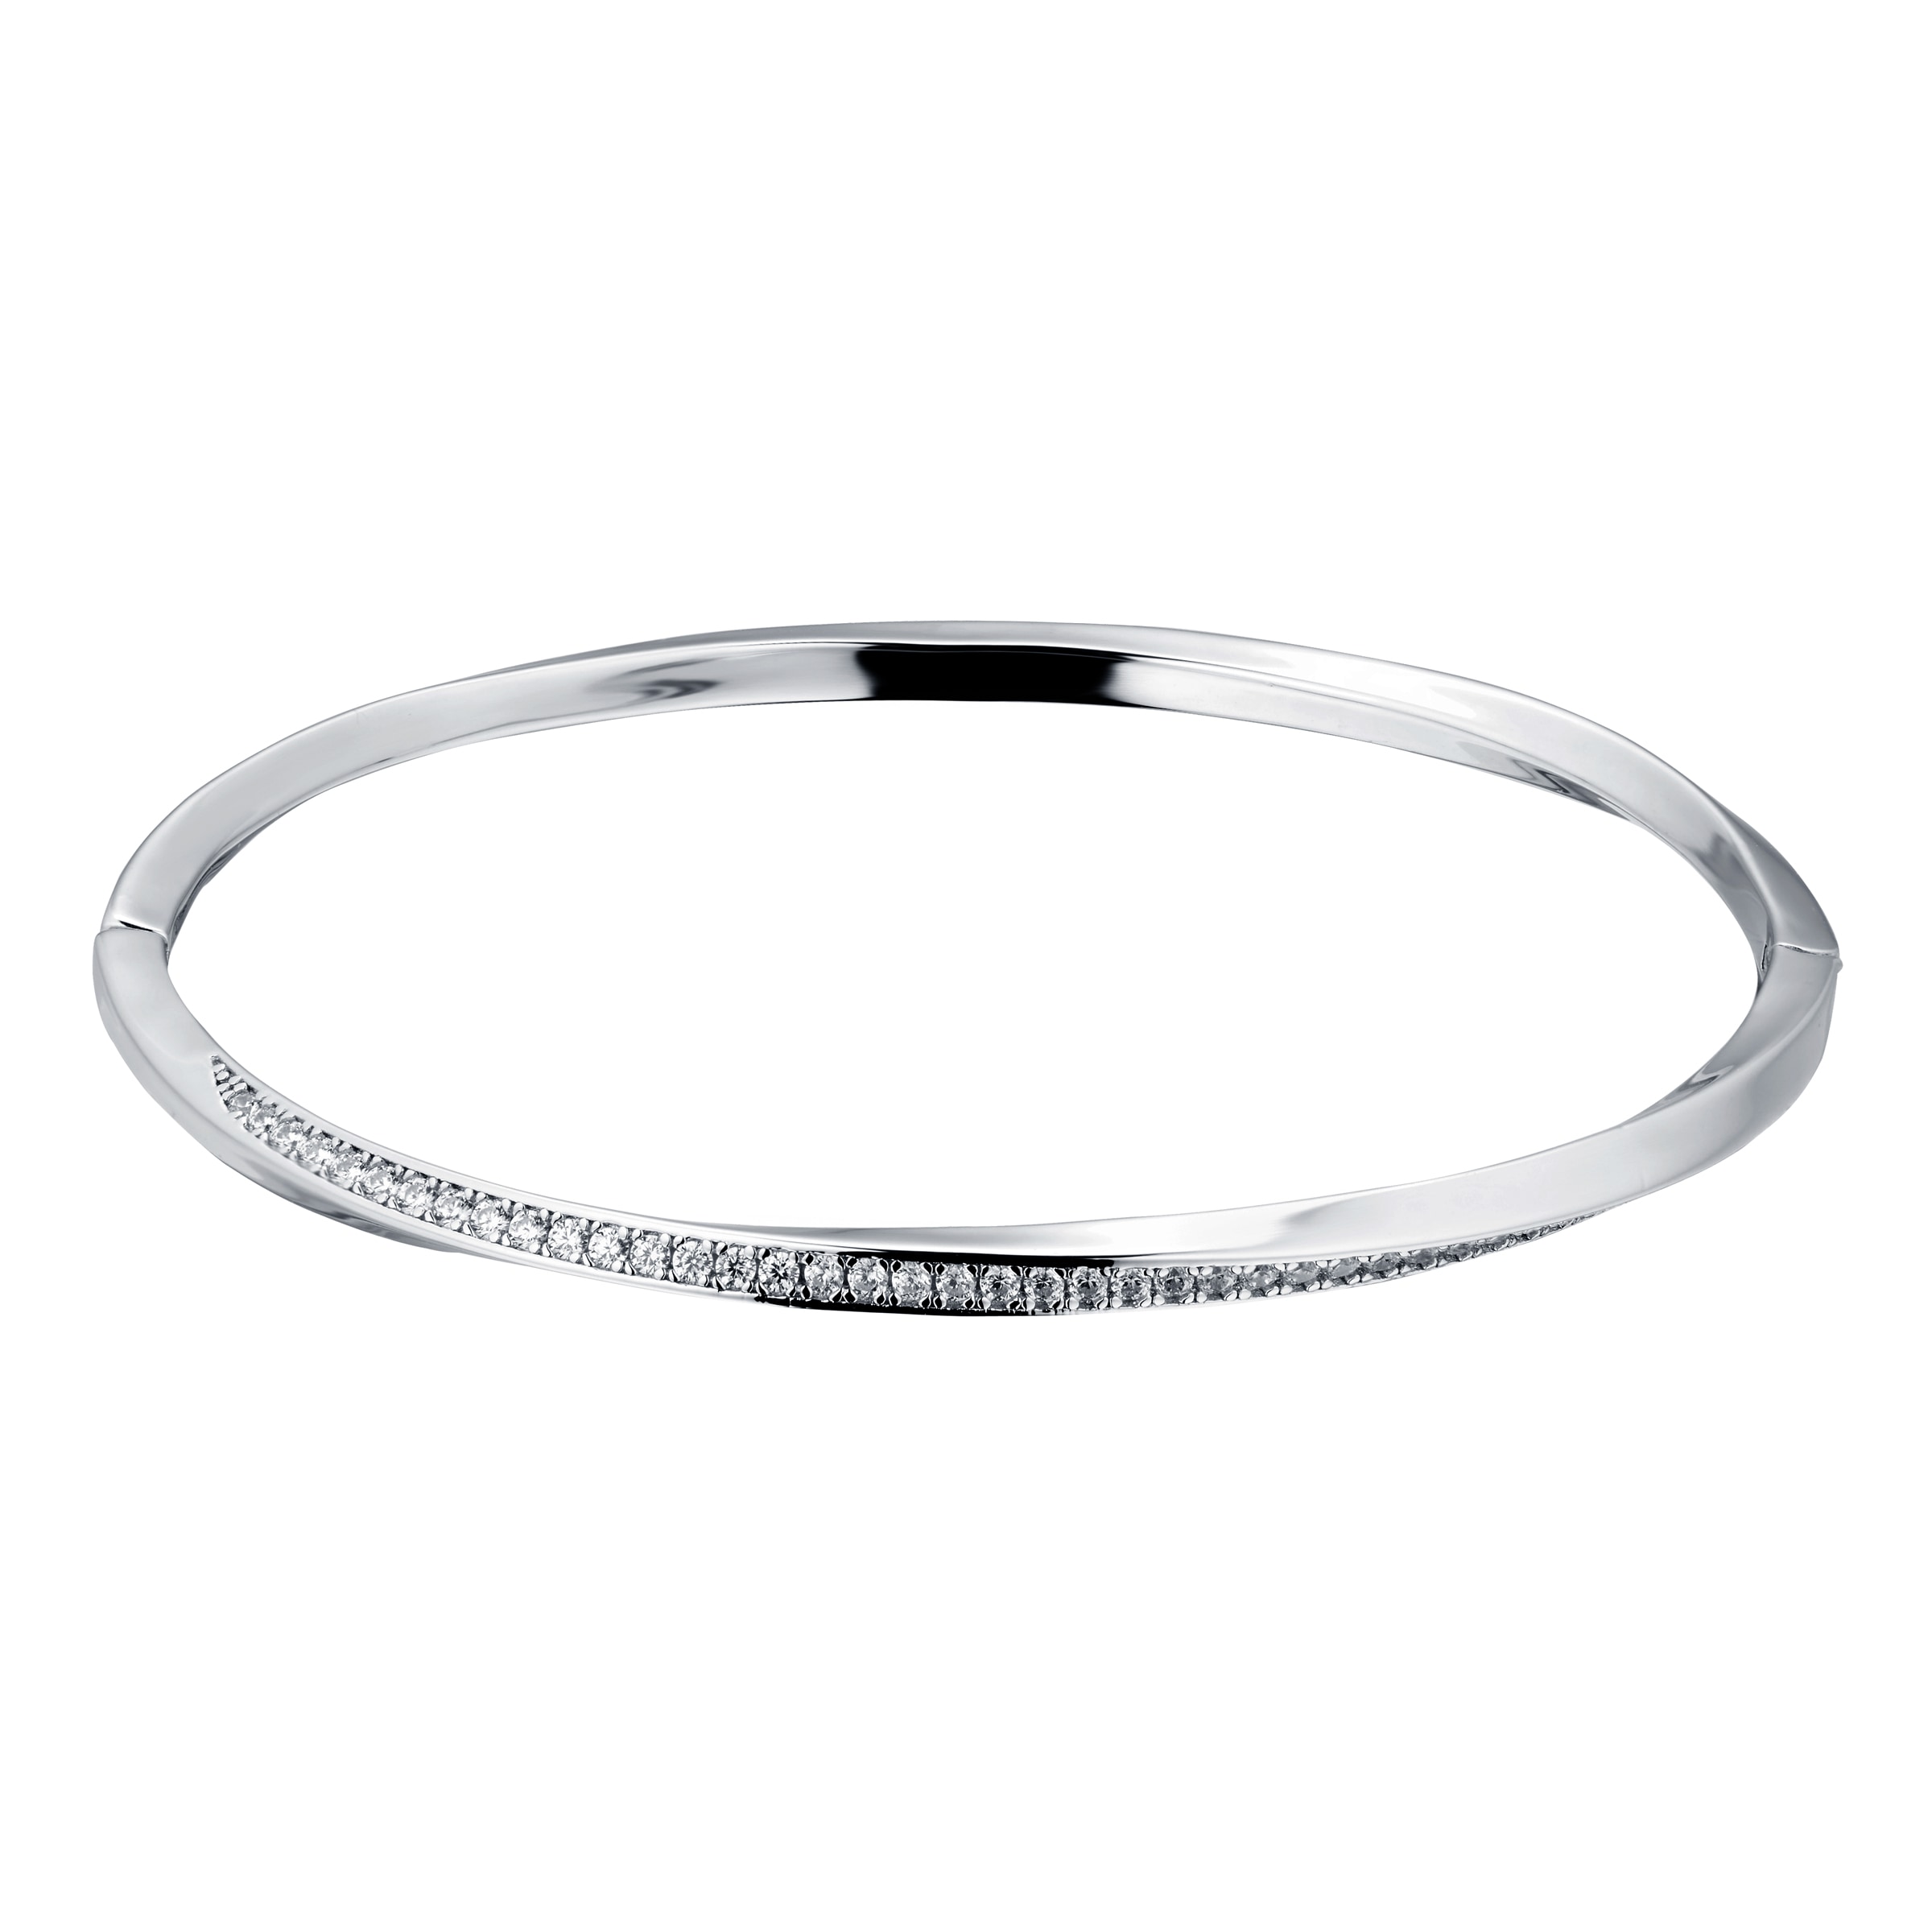 Silver Twisted Pave Cubic Zirconia Bangle